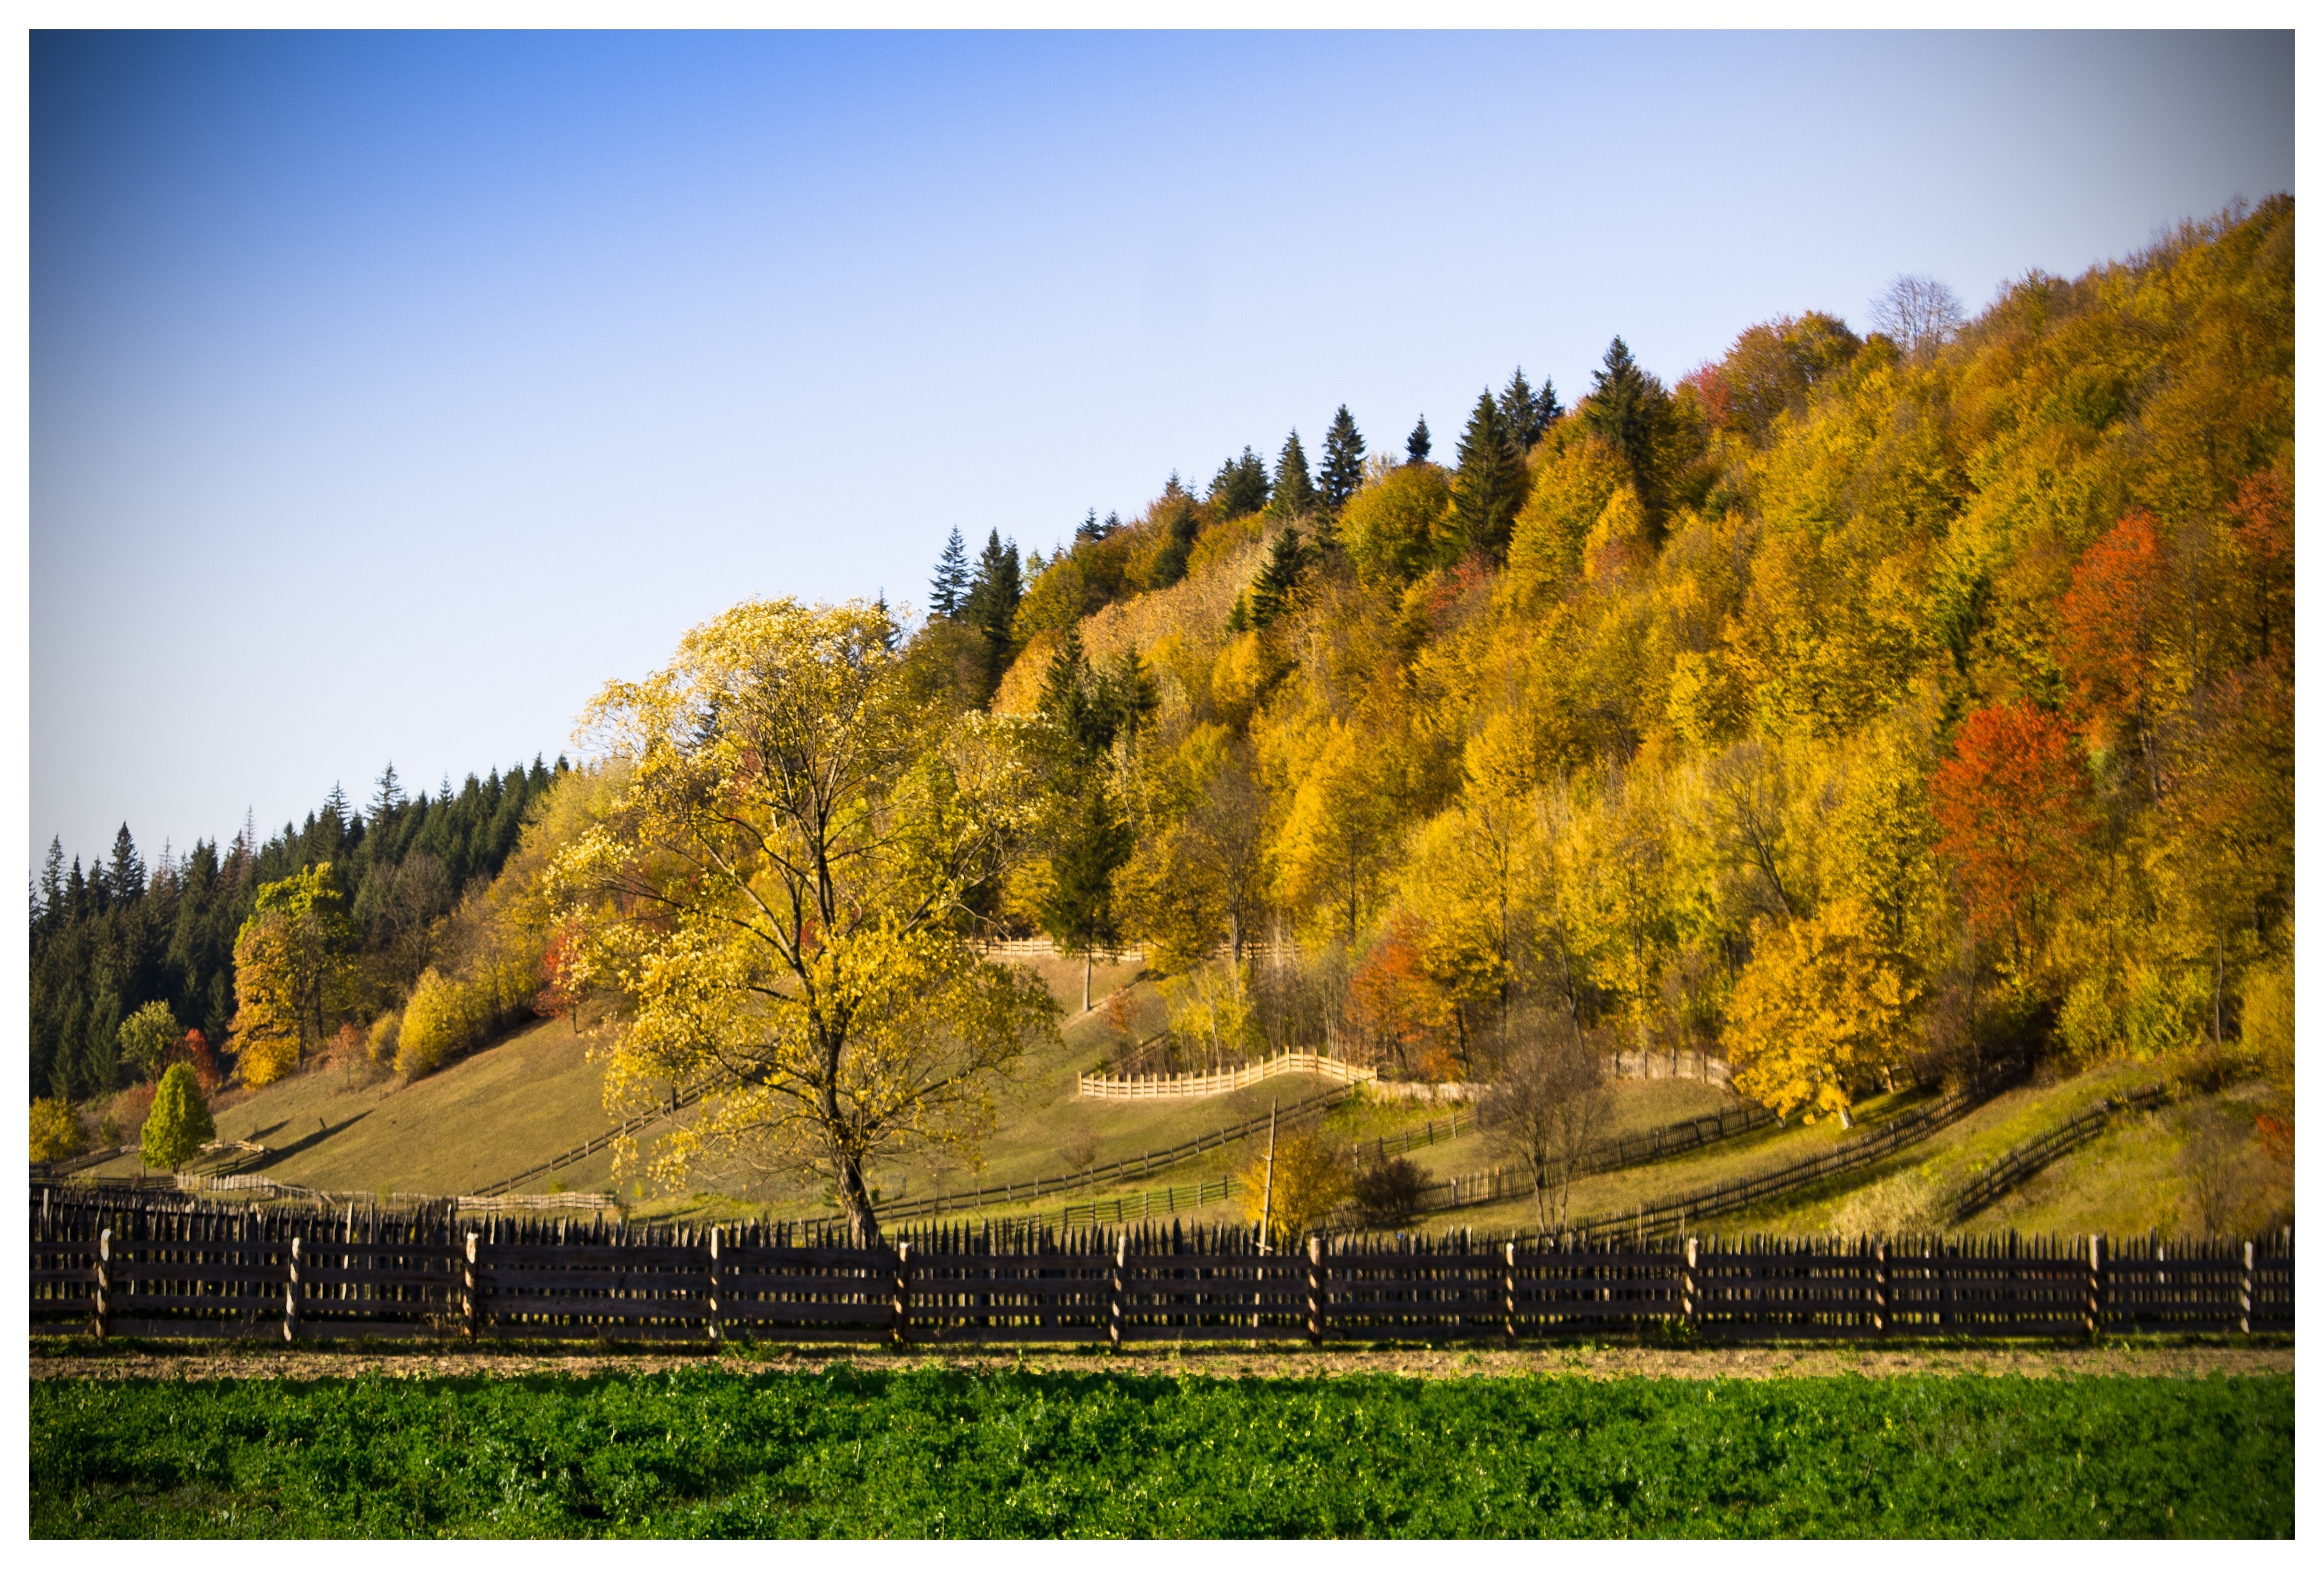 brown wooden fences beside green field during daytime